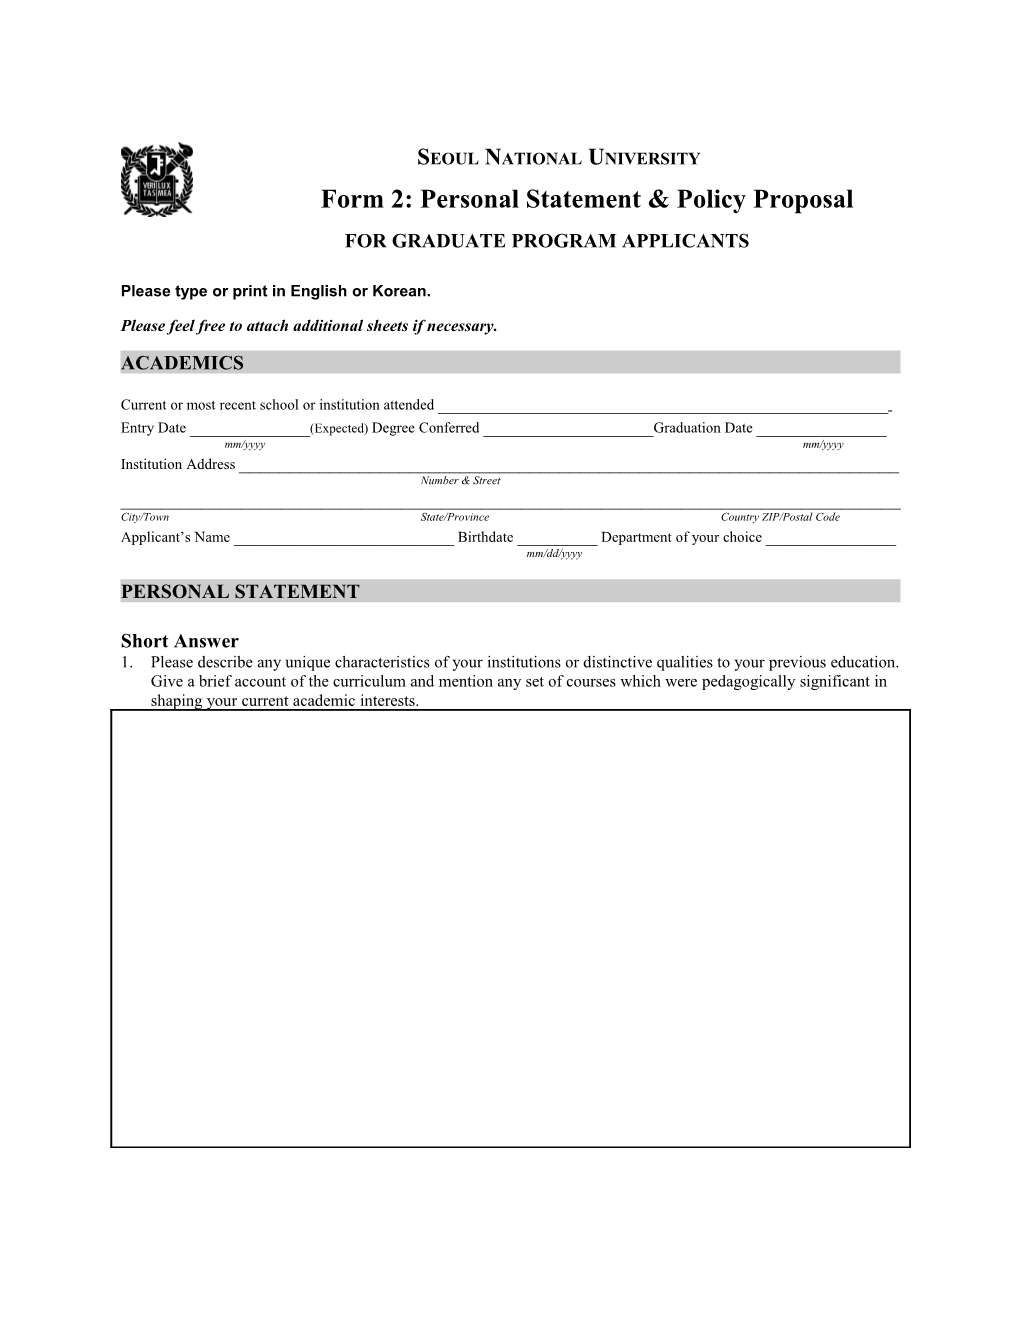 Form 2:Personal Statement & Policy Proposal